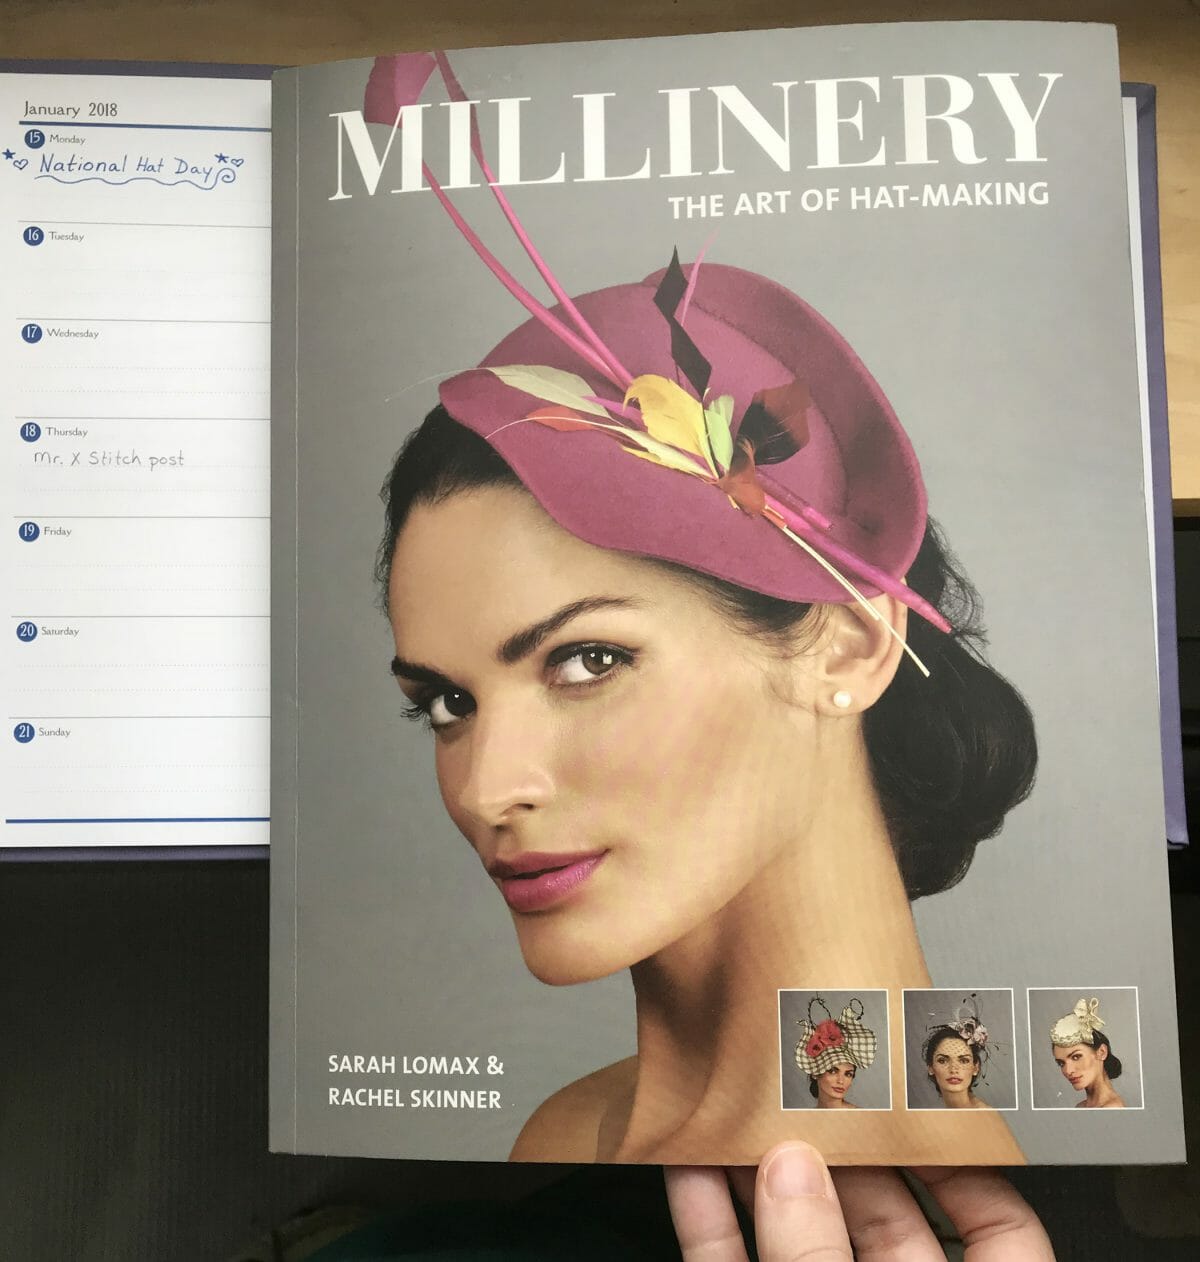 Book Review: “Millinery – The Art of Hat-Making”